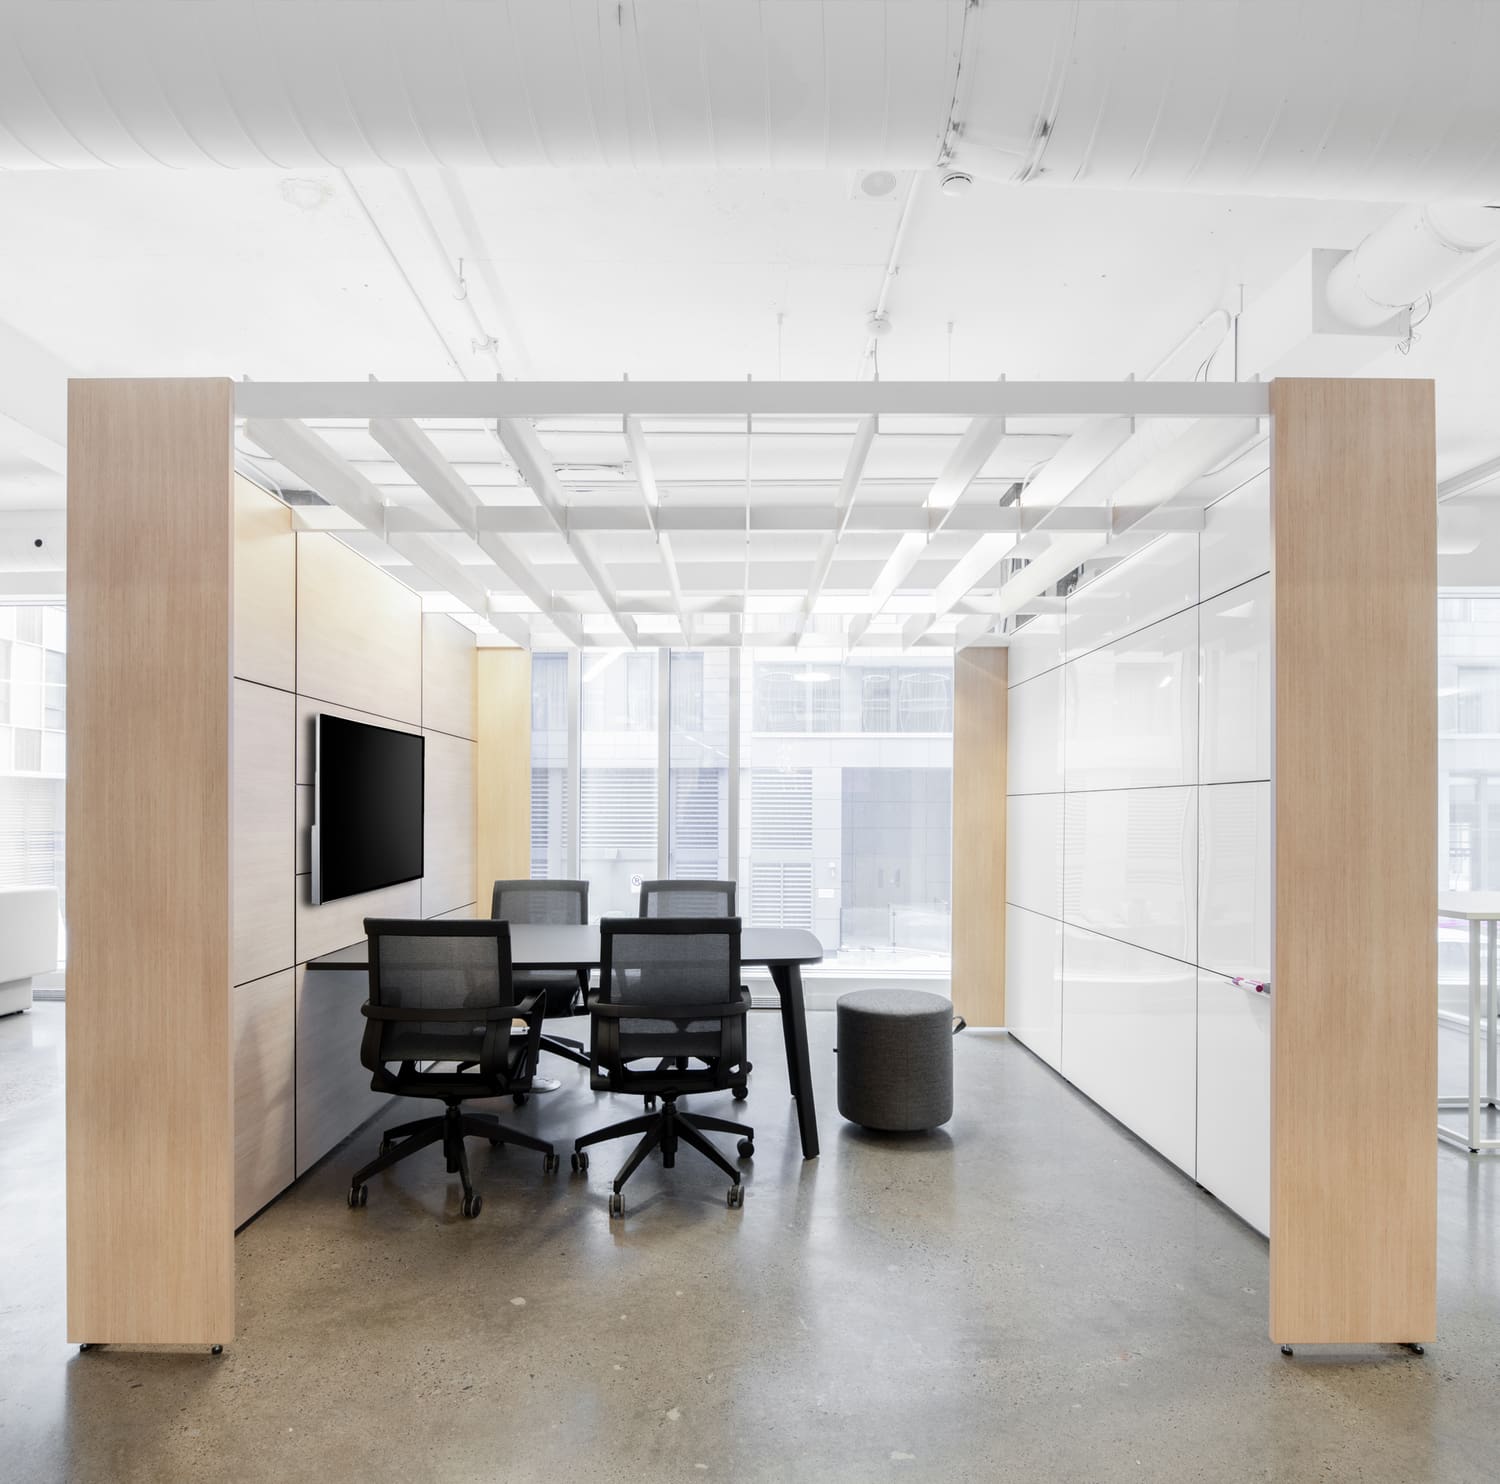 Semi-Private Meeting Spaces for Collaboration